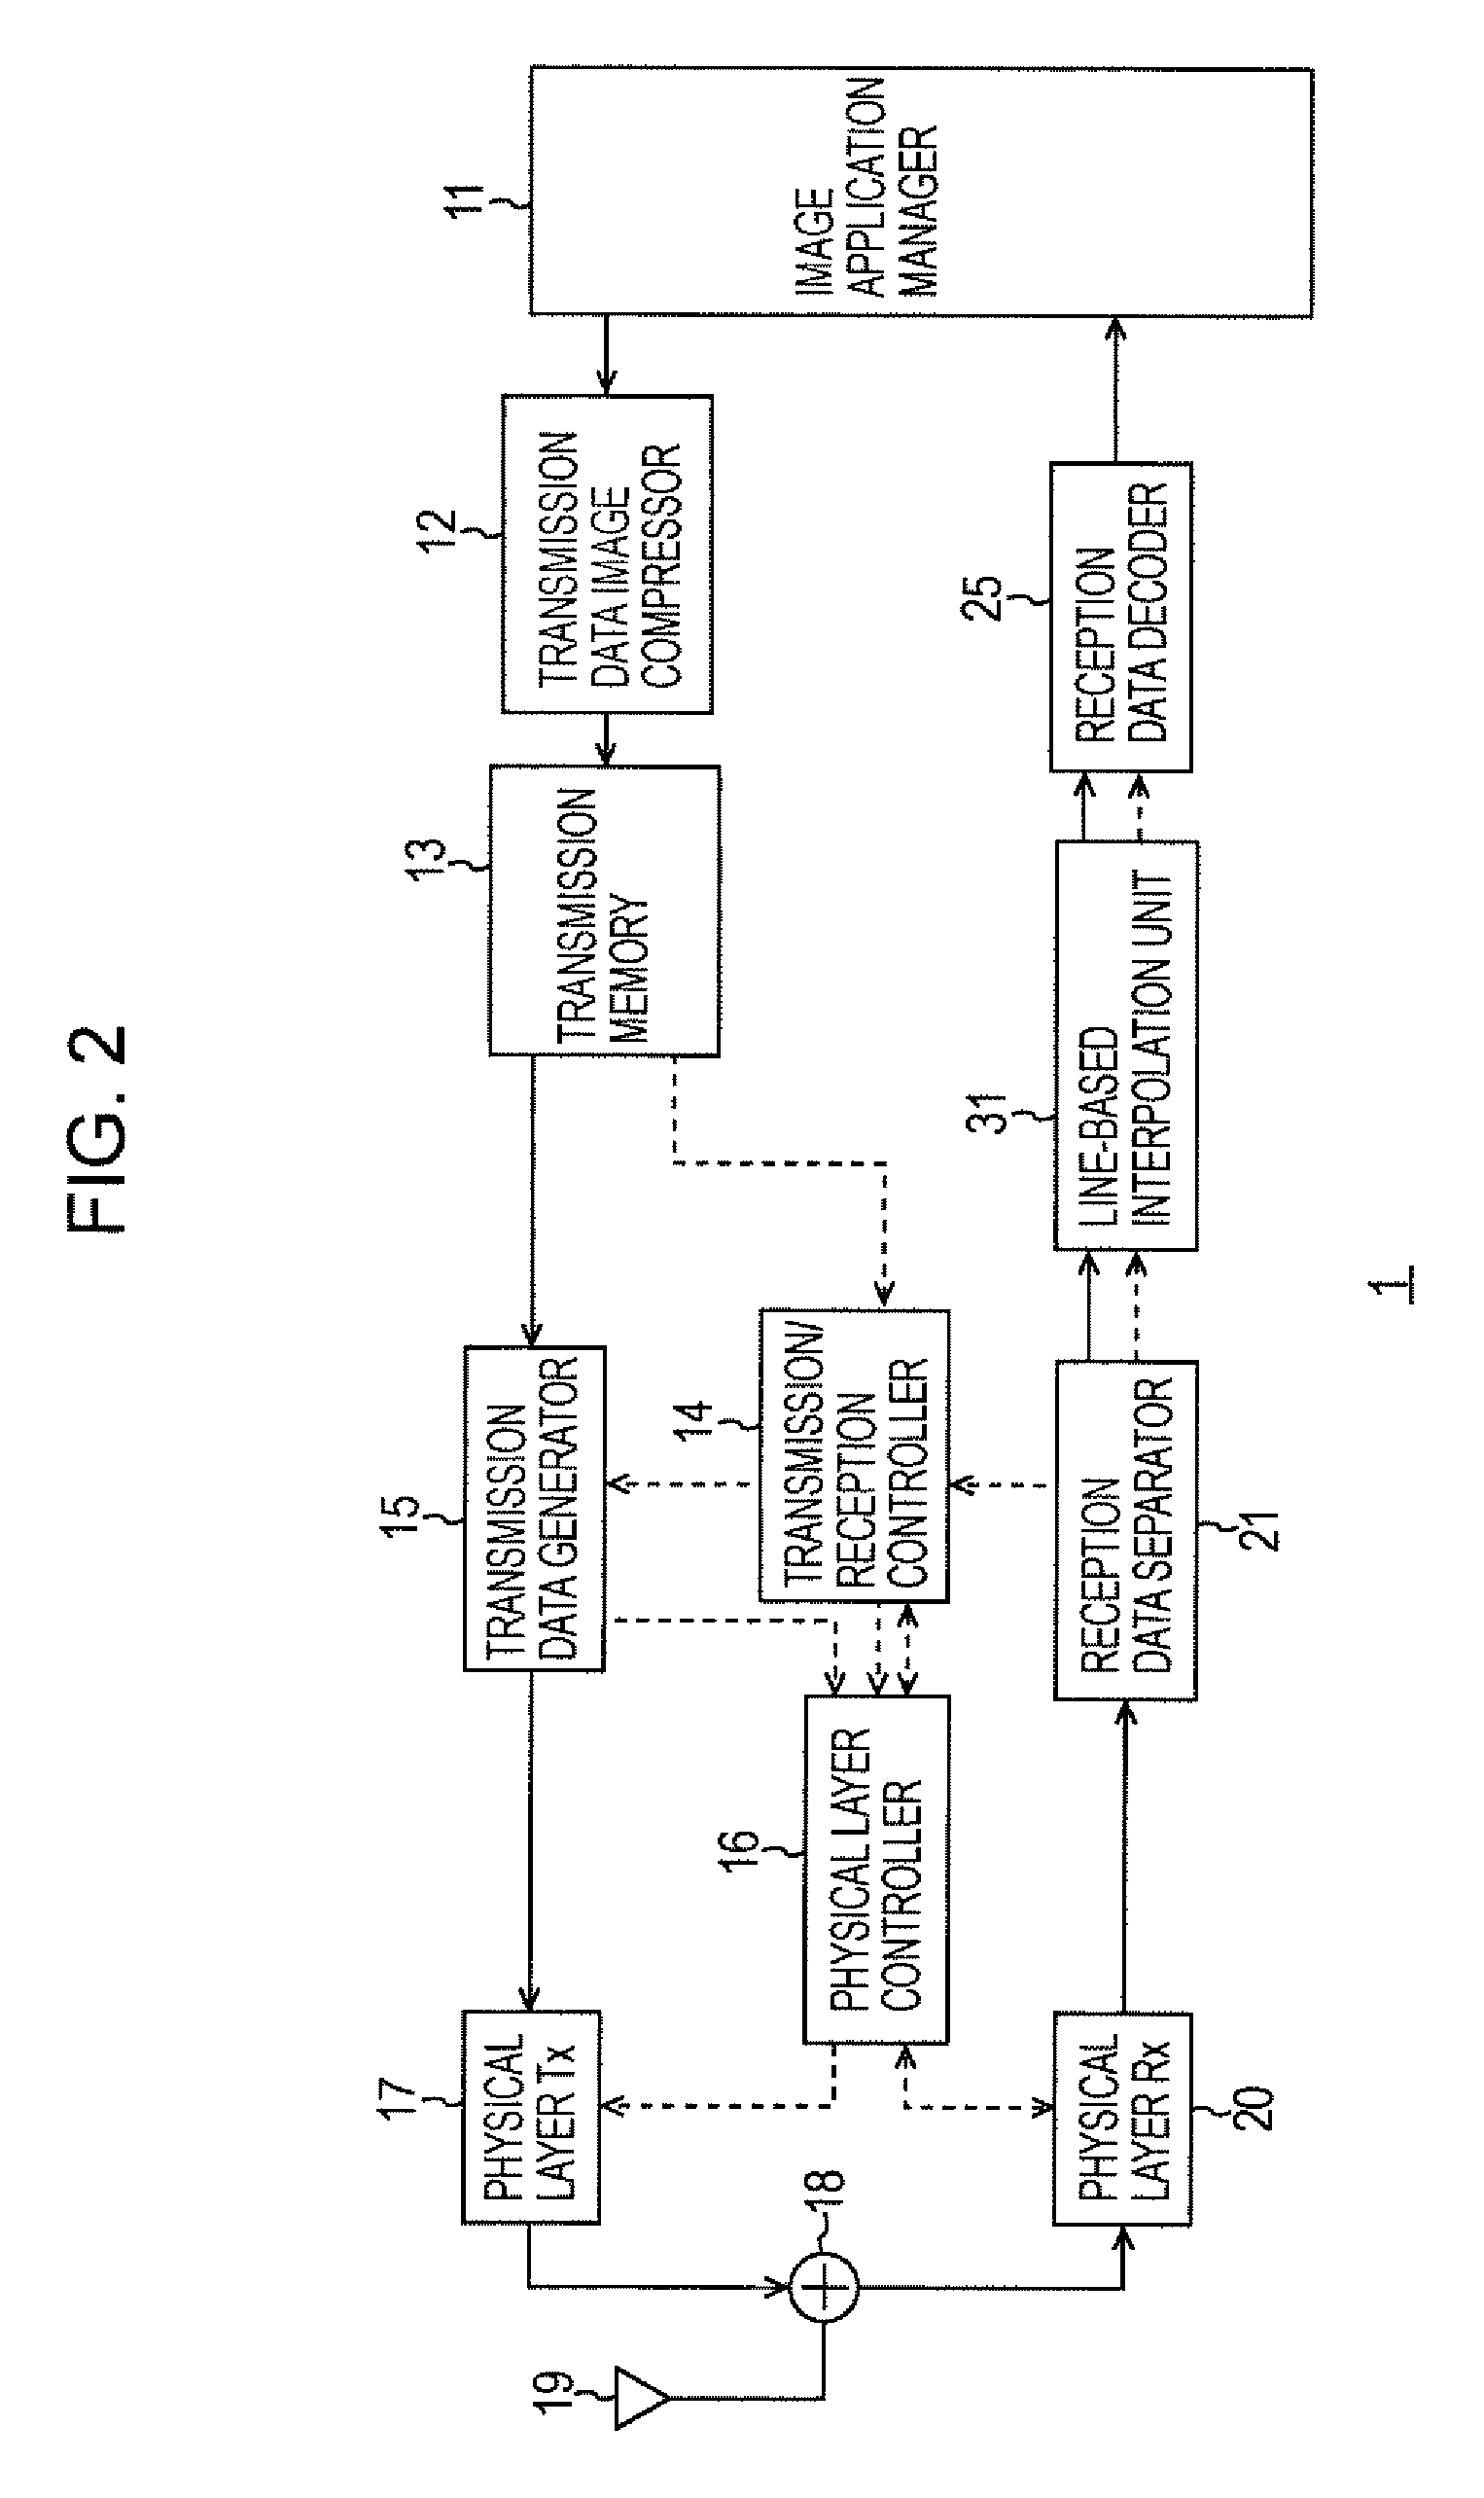 Communication apparatus and method for data interpolation